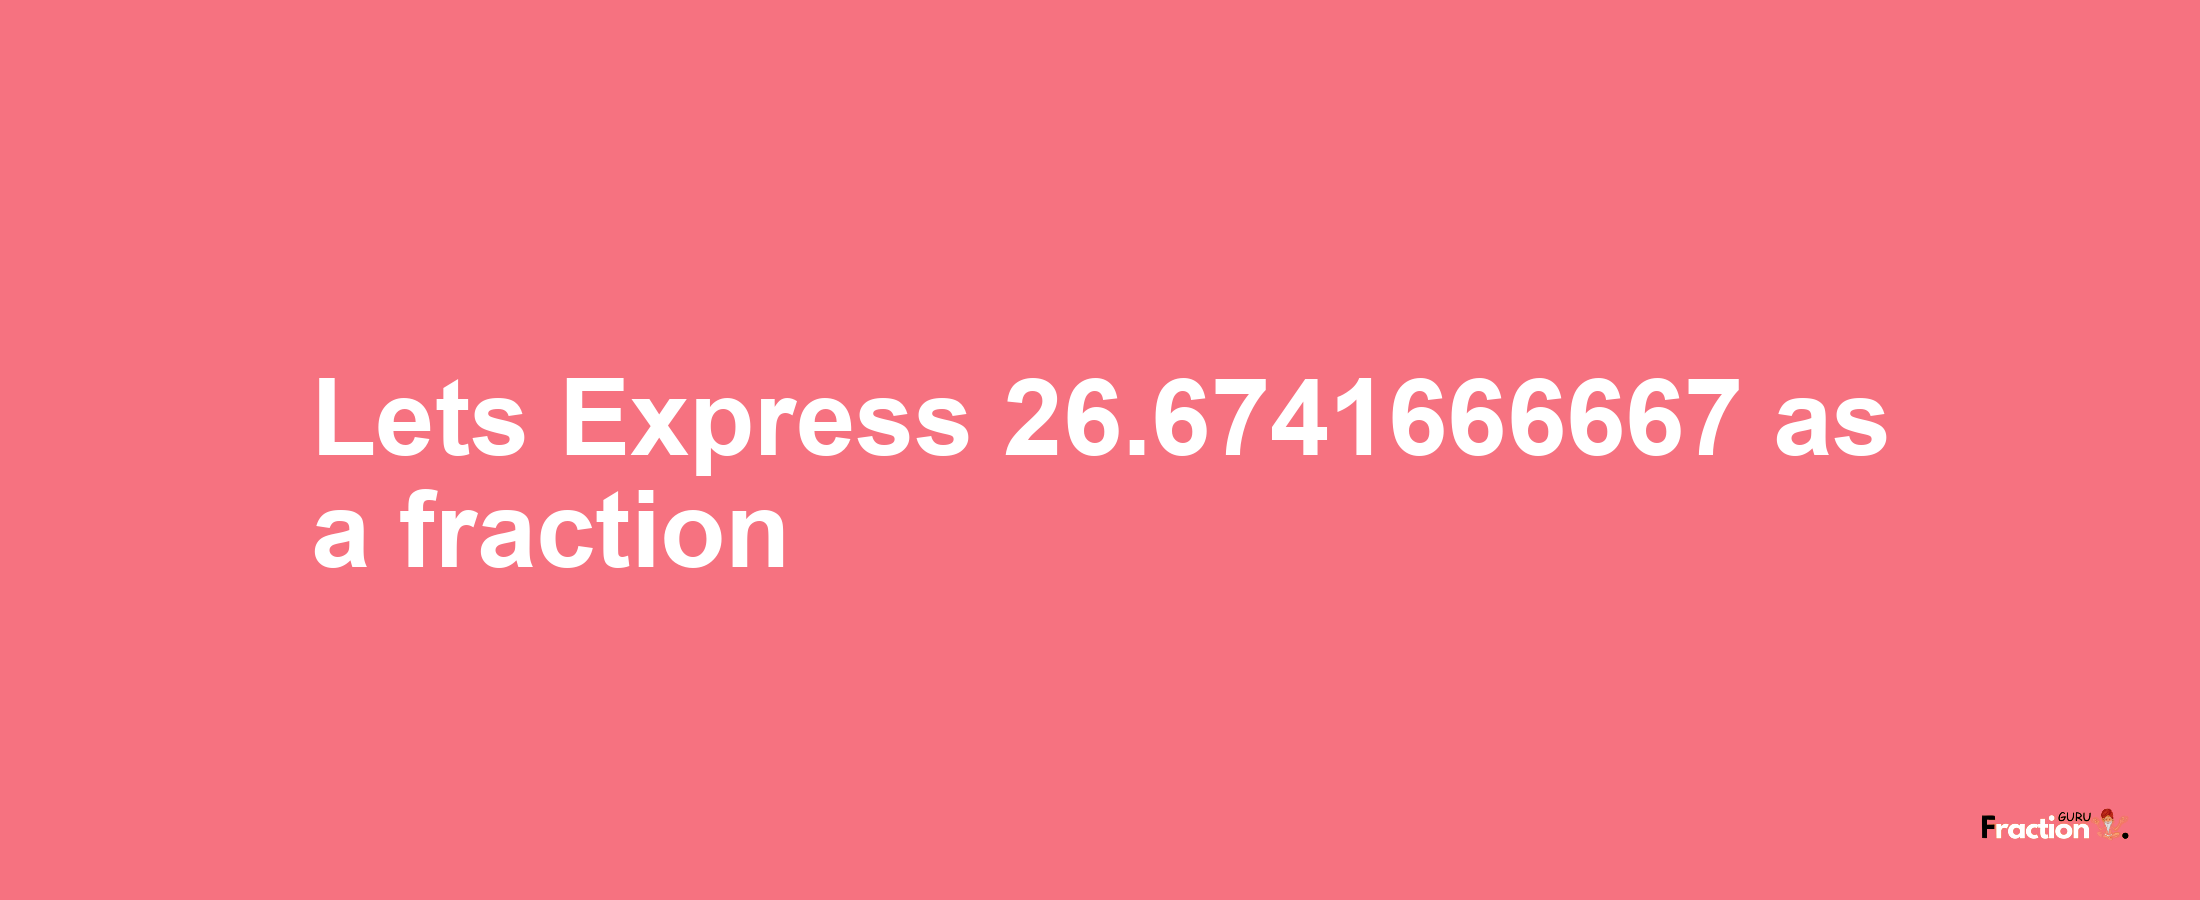 Lets Express 26.6741666667 as afraction